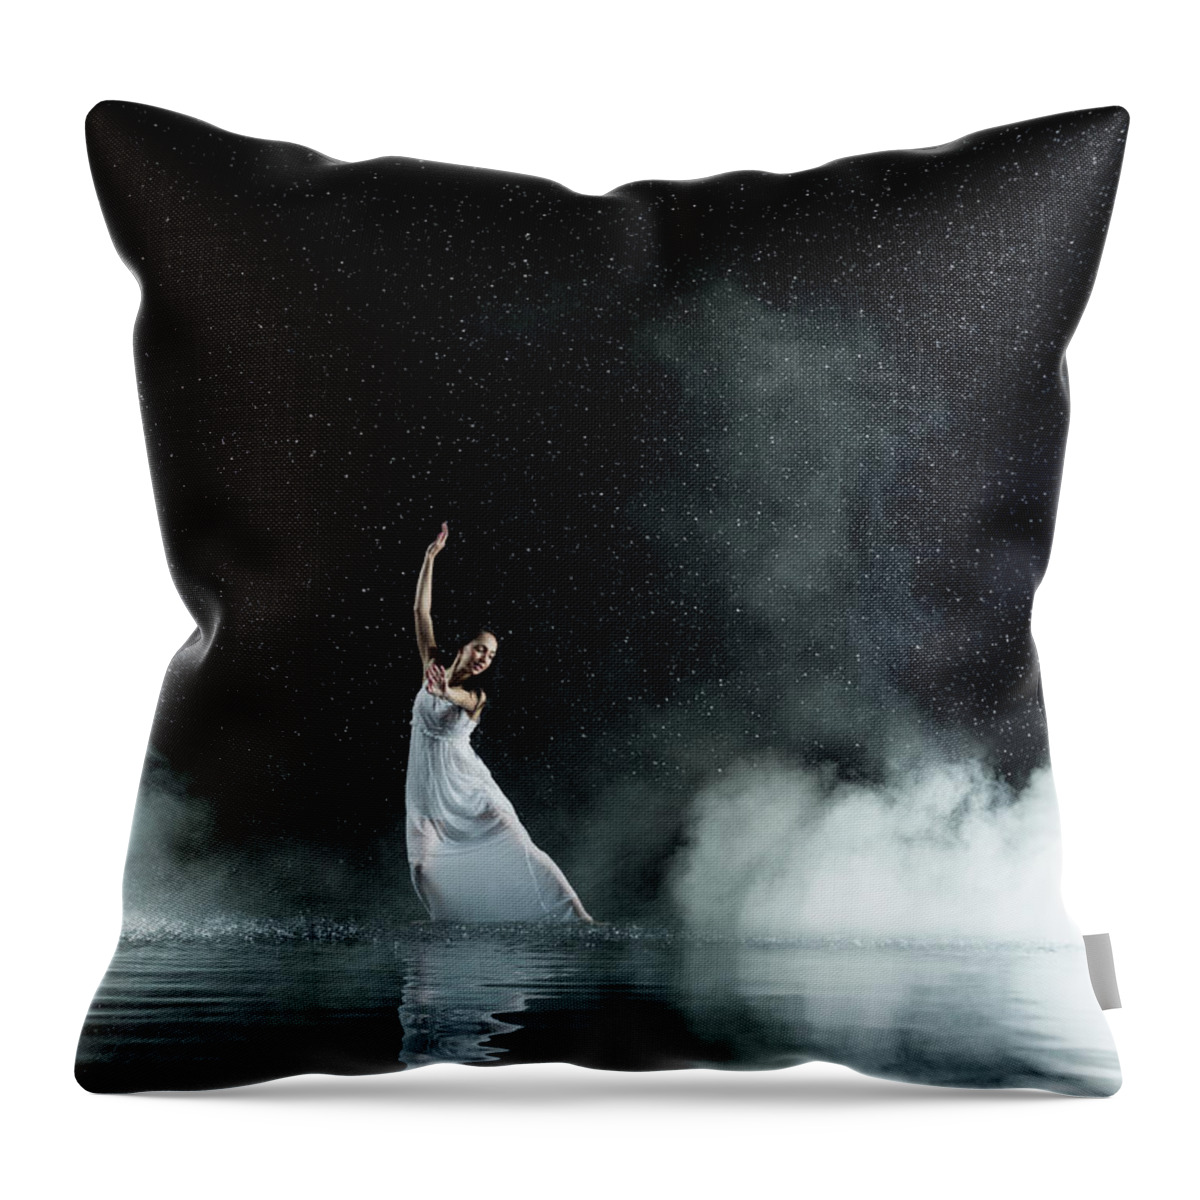 Human Arm Throw Pillow featuring the photograph Dancing Female In Water, Rainy And by Jonathan Knowles